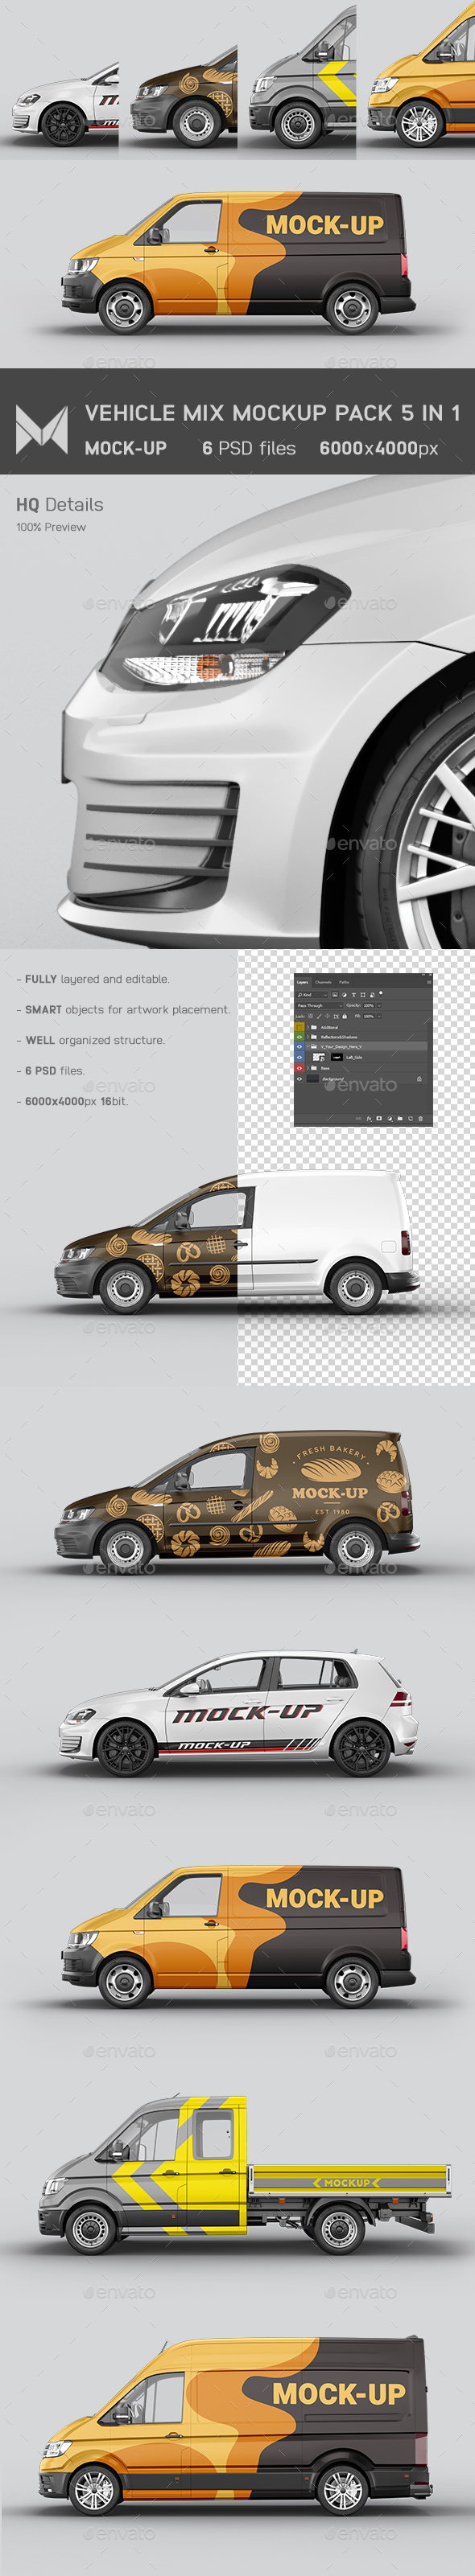 Vehicle Mix Mockup Pack 5 in 1 Vol.1